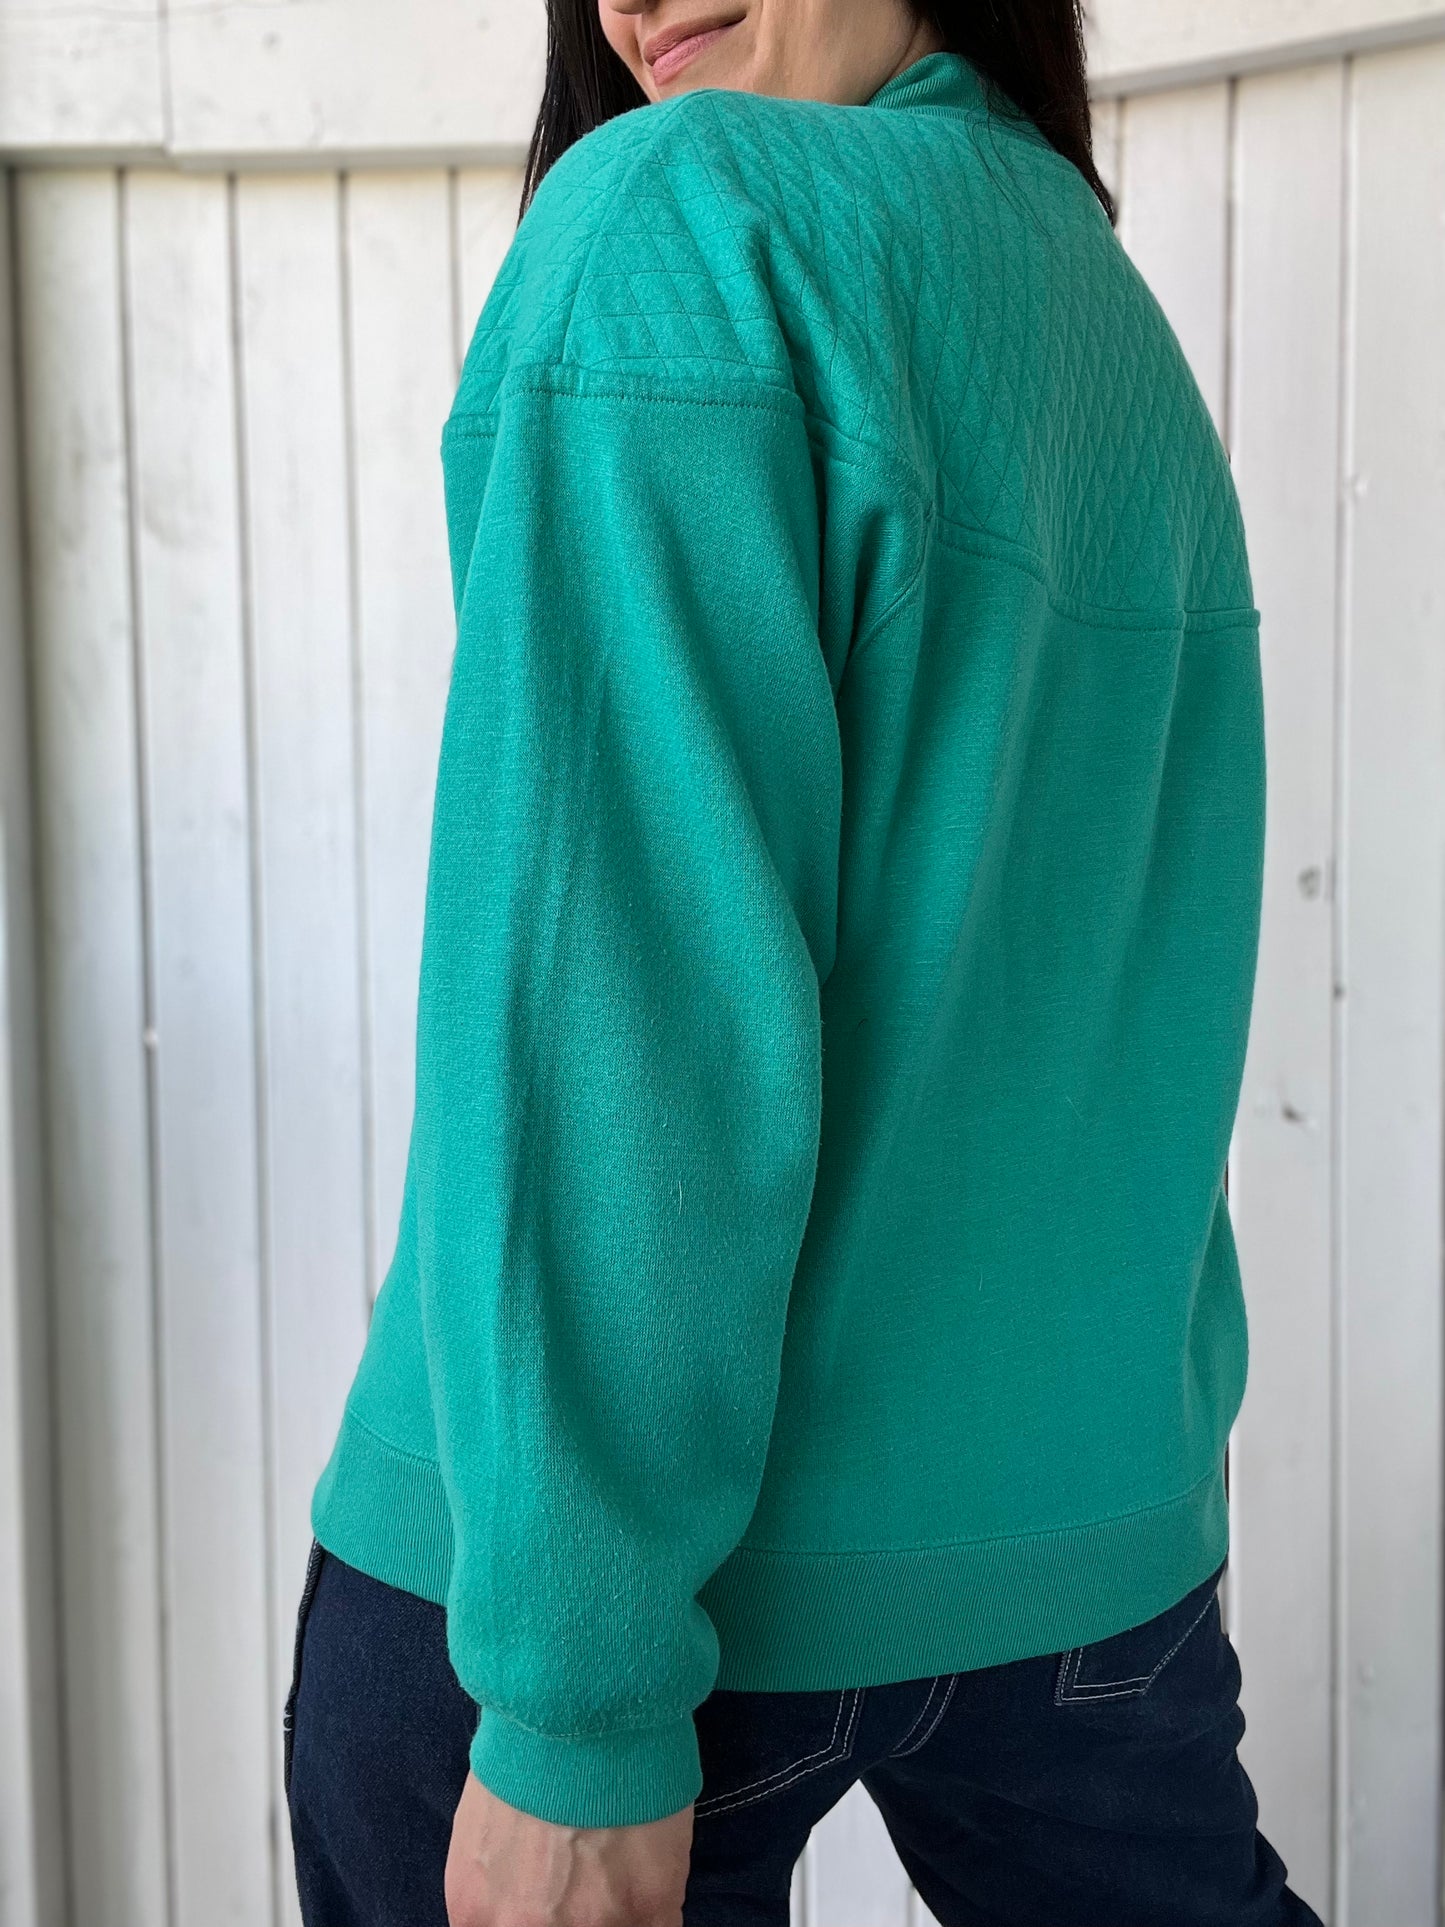 Turquoise Quilted Sweater - Size L